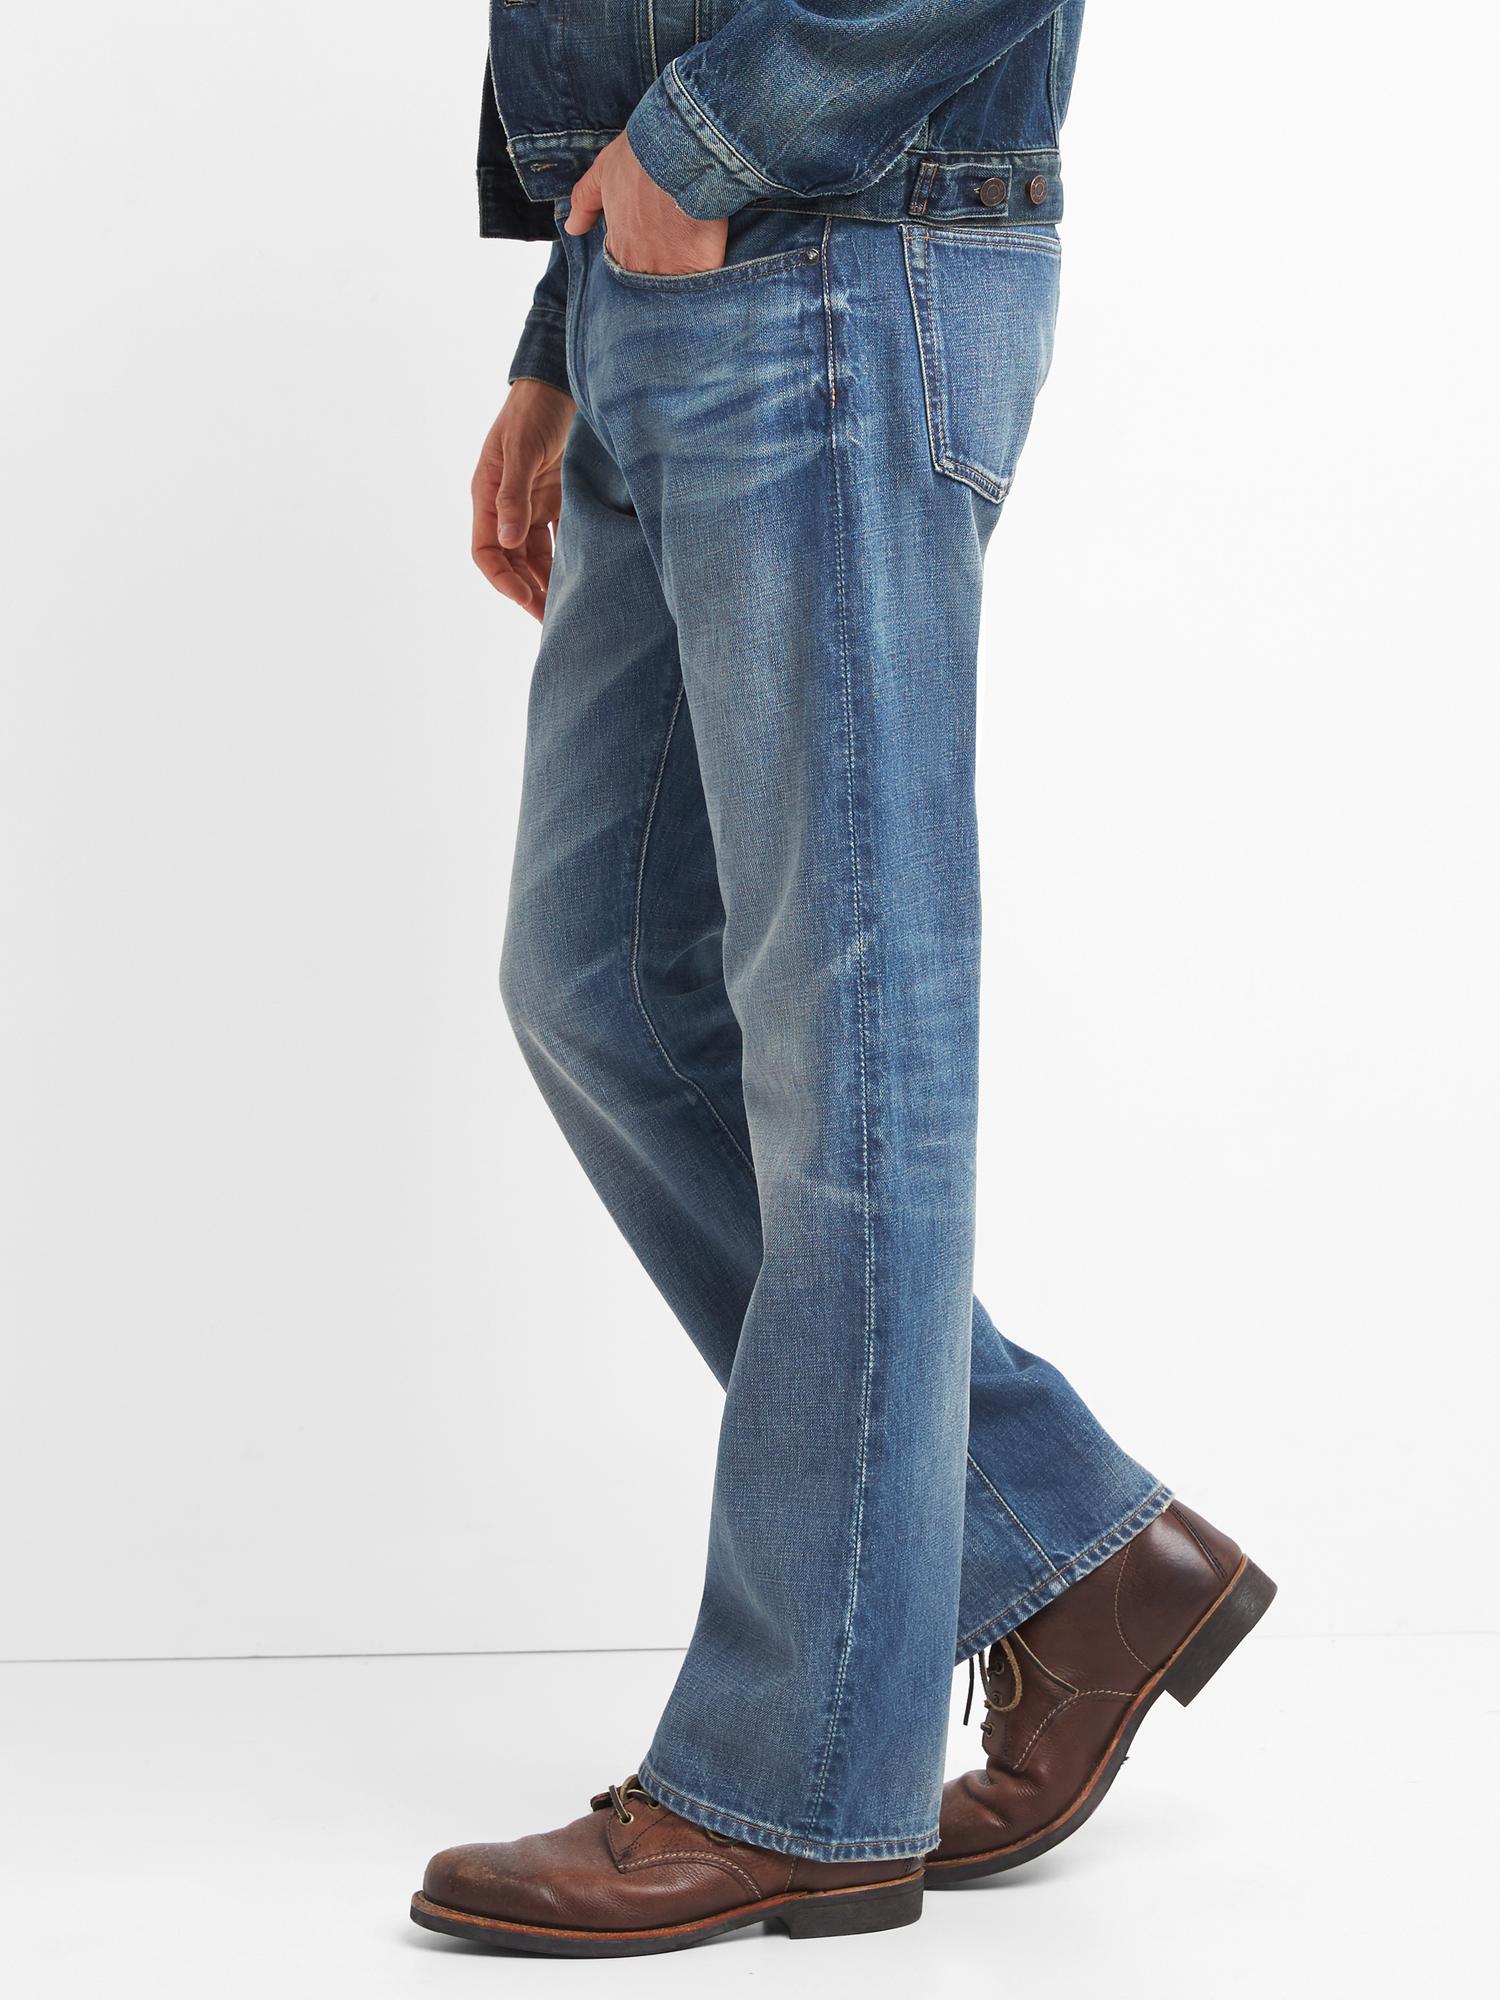 Buy Gap Mid Rise Bootcut Jeans from the Gap online shop